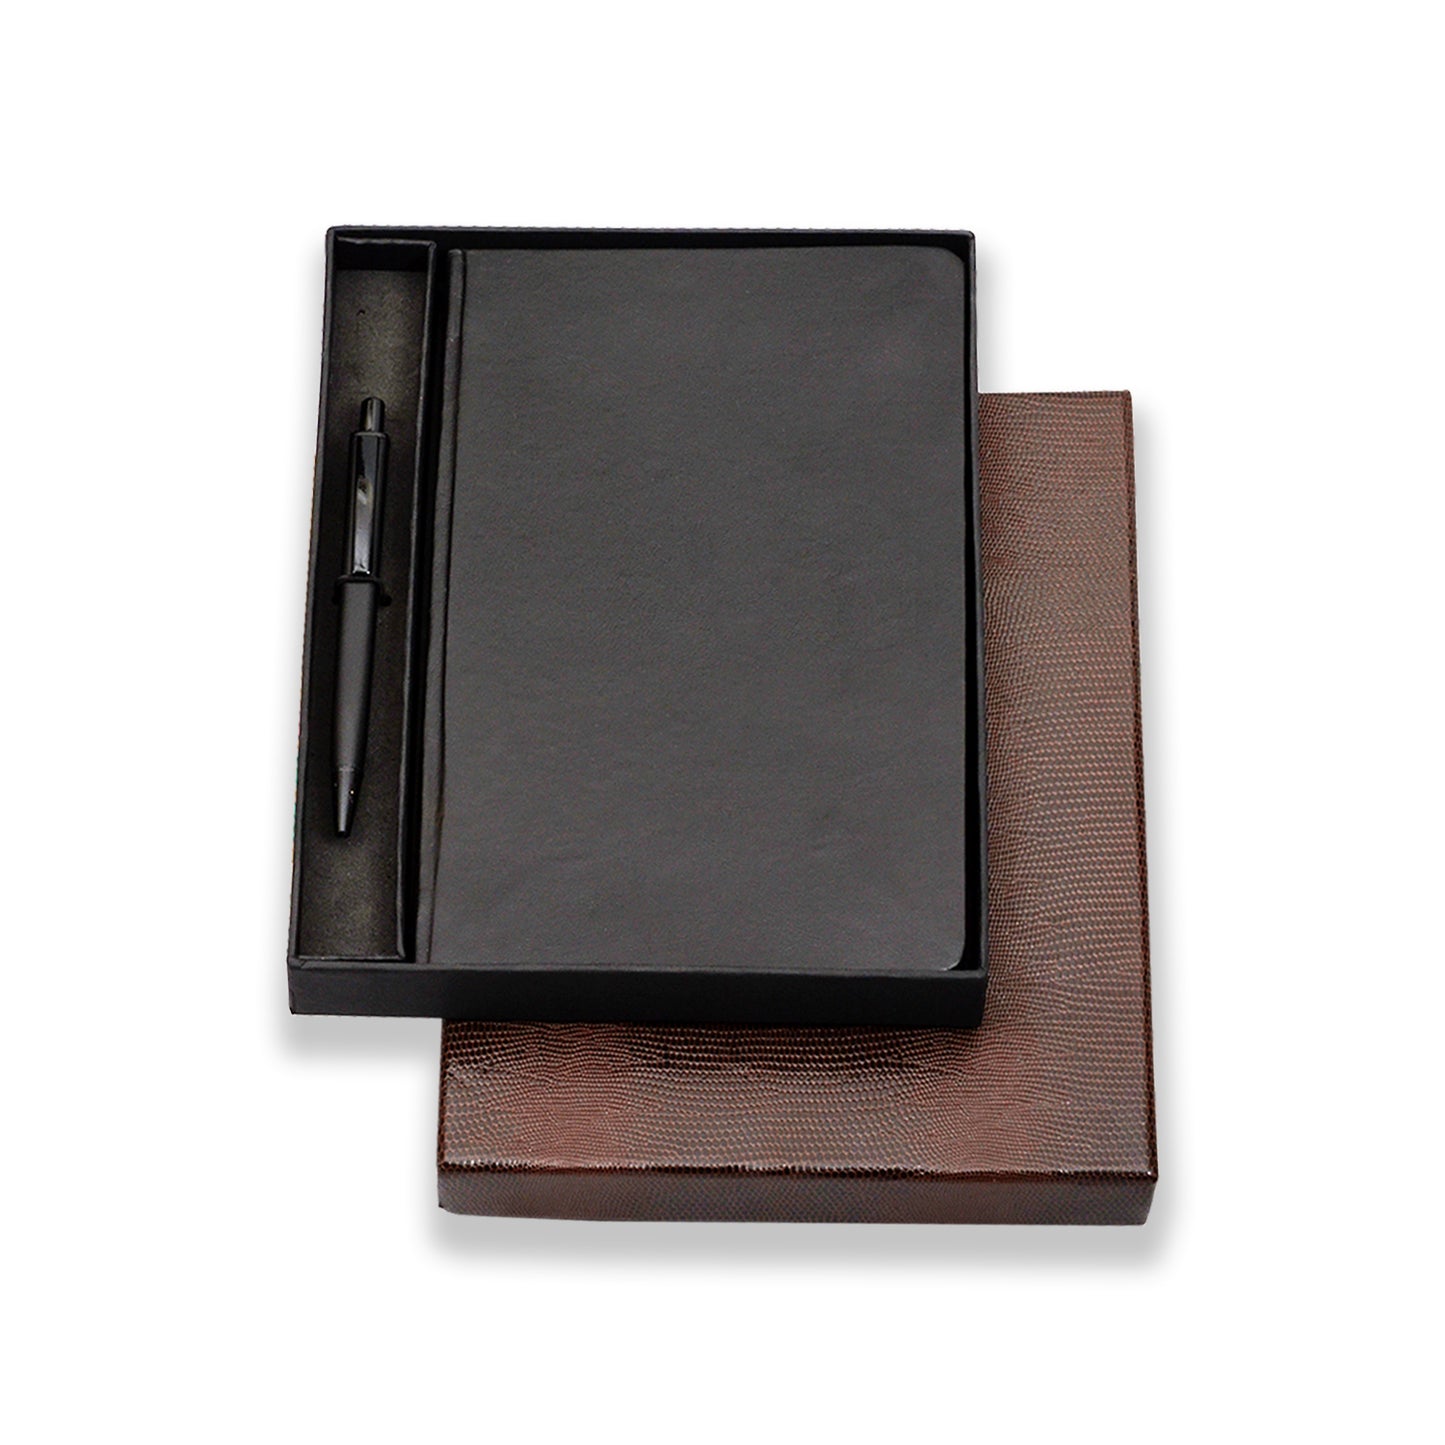 Vintage Notebook with Elastic Lock Pen Gift Box Diary Planner Organizer for Men and Women with pen